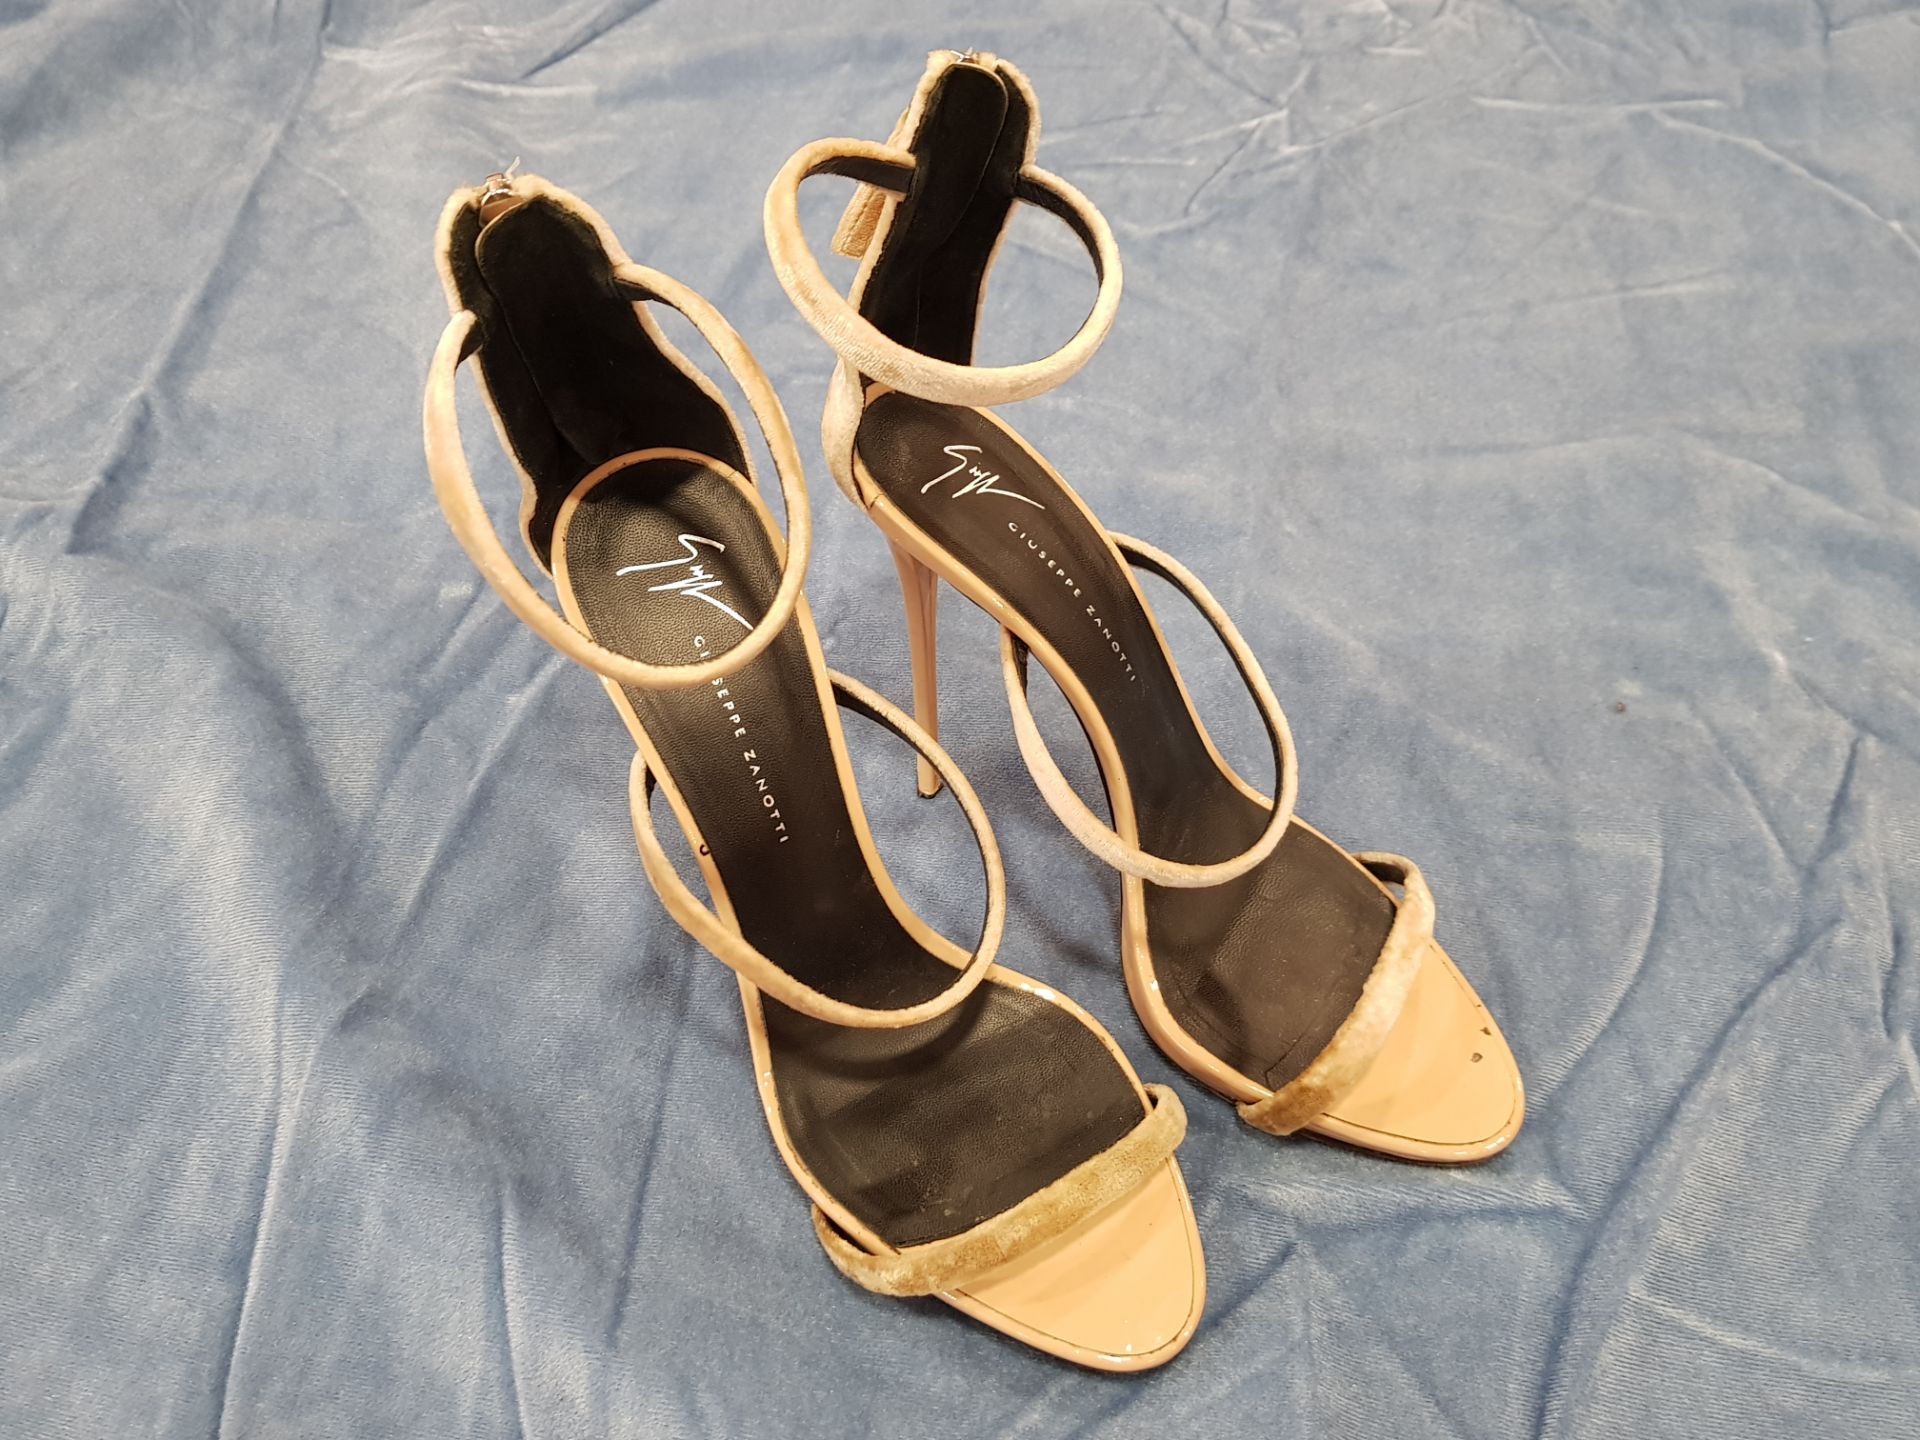 1 X PAIR GIUSEPPE ZANOTTI NUDE VELVET HIGH HEELED SHOES SIZE 40.5 - PLEASE NOTE ITEMS PRE OWNED